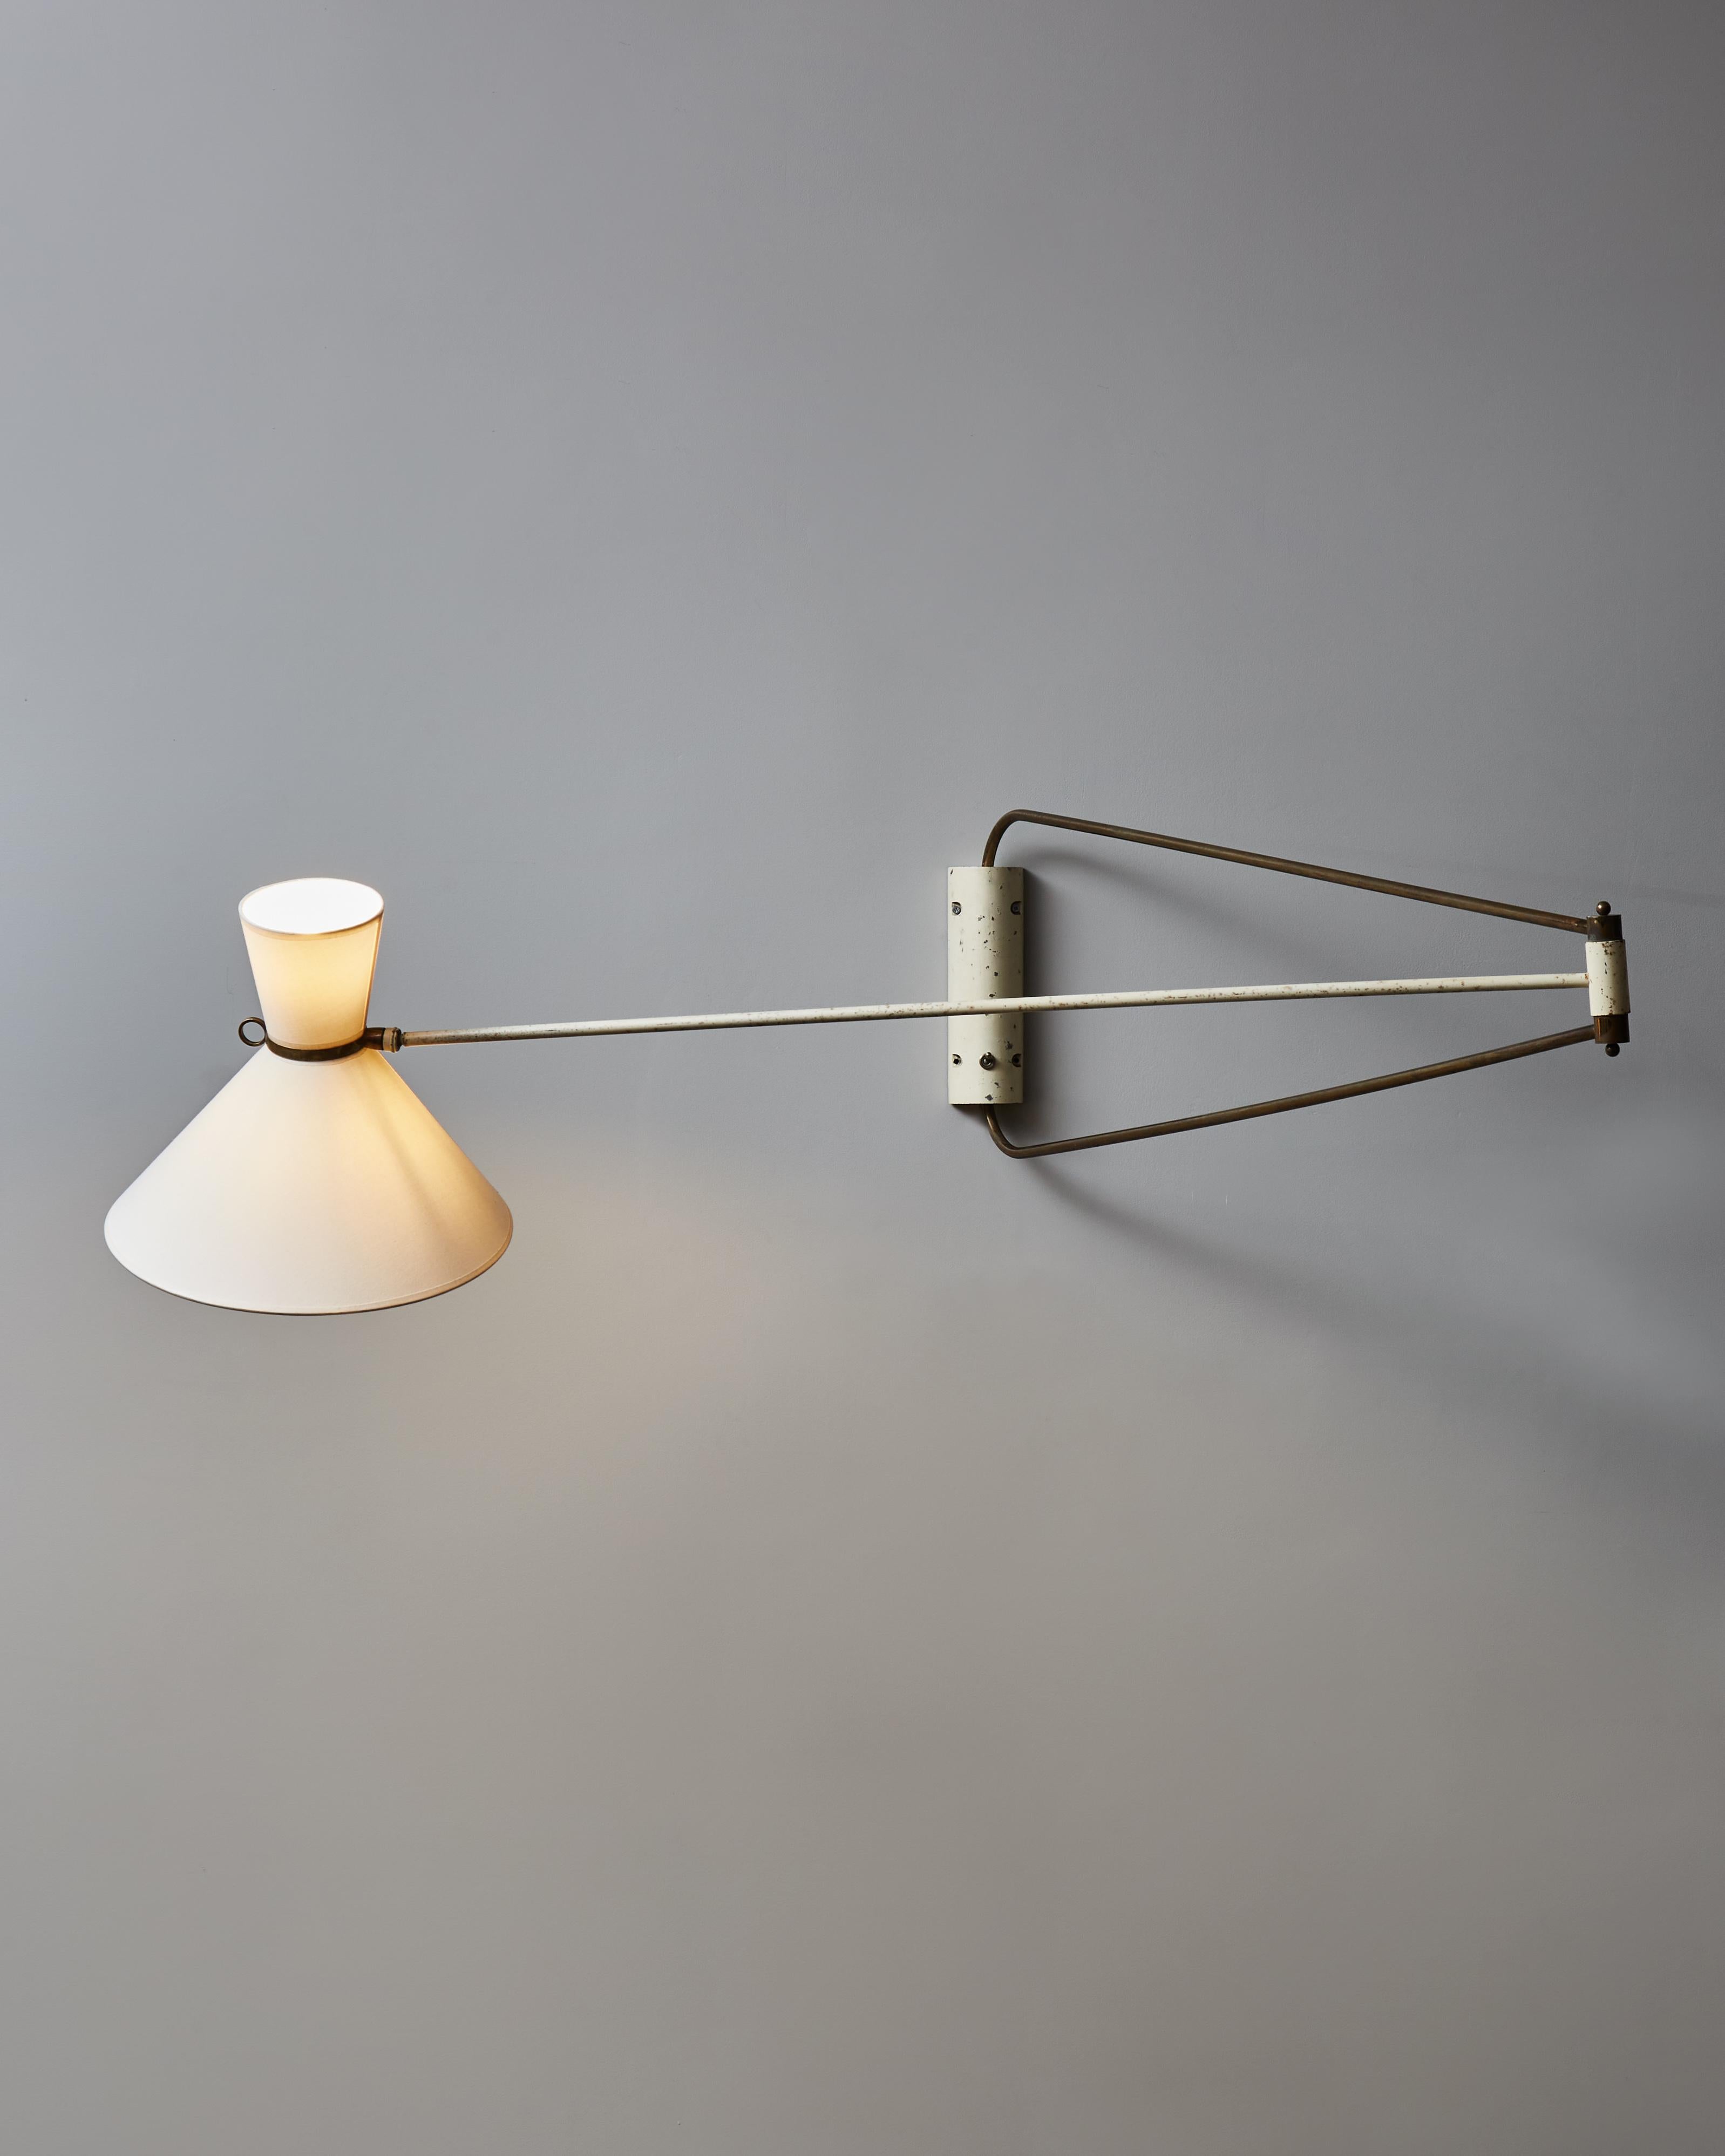 Impressive Robert Mathieu wall sconce made of aluminum and brass arms and fittings and restored tapered shades. Thanks to its different pivoting points and dimensions, the lamp can be adjusted in many directions and has a great reach. This wall